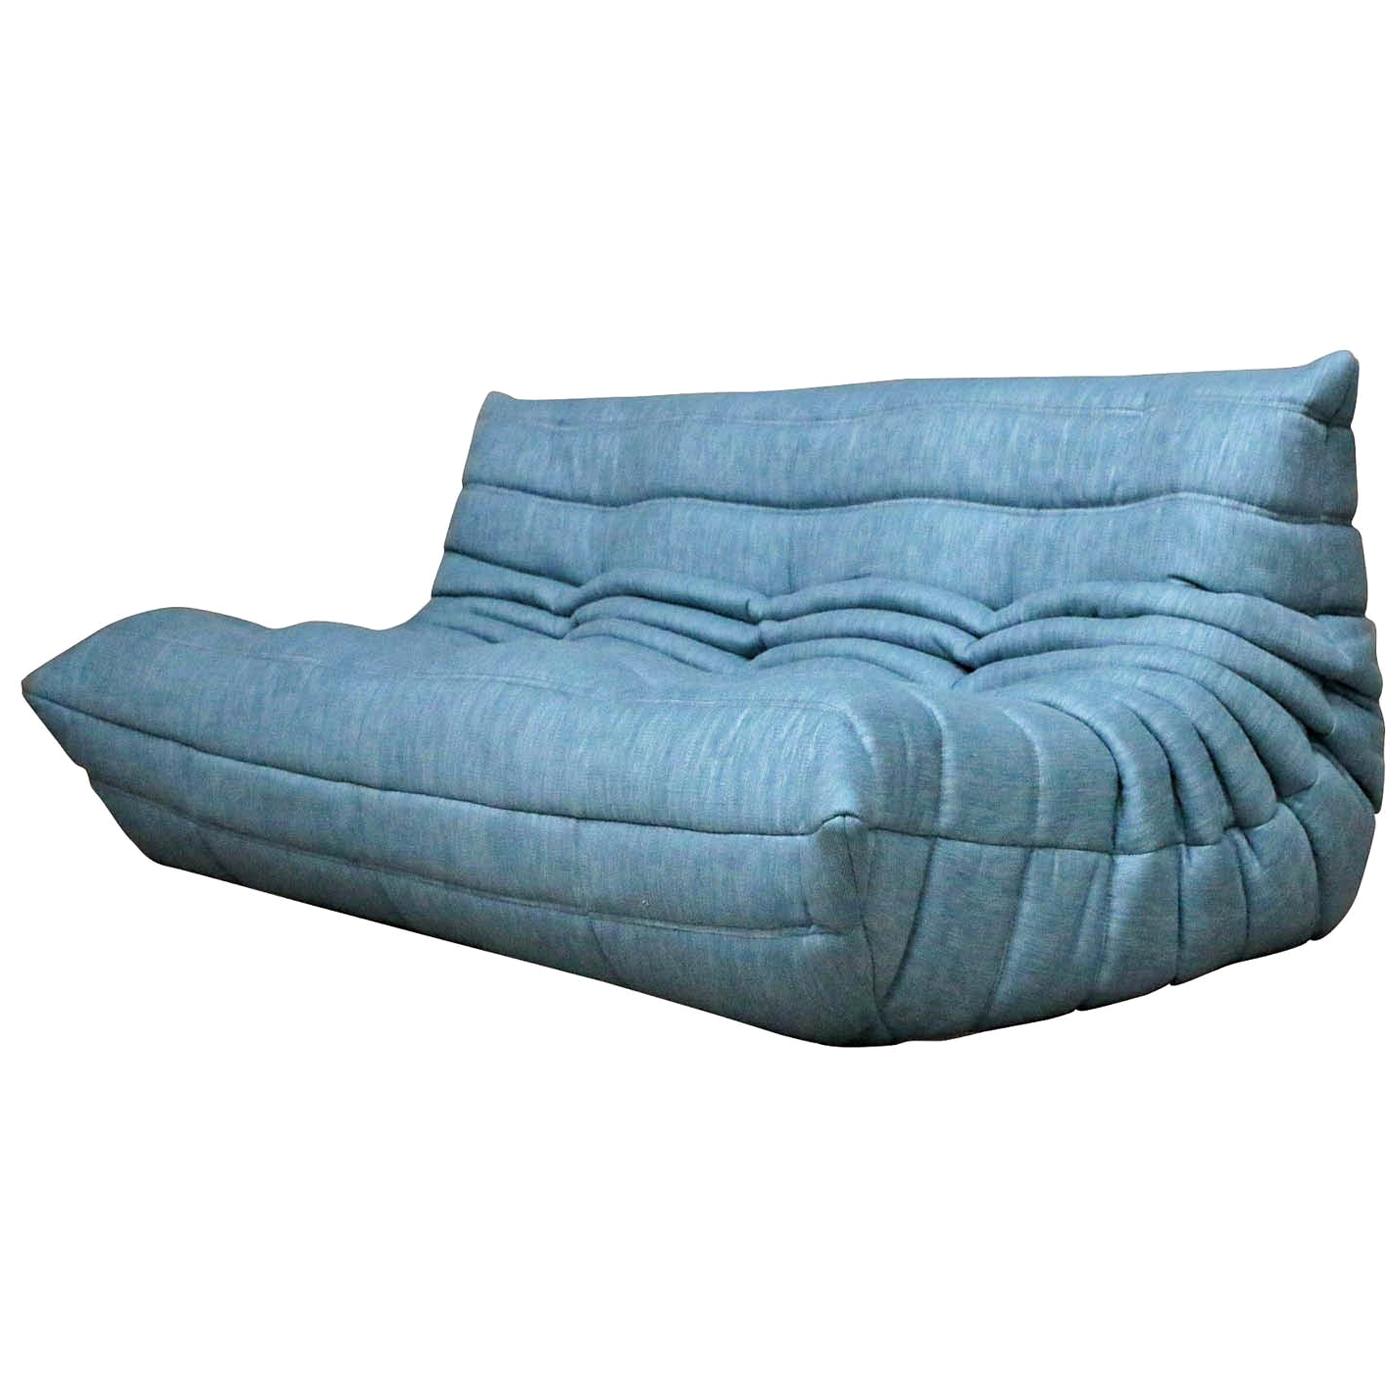 CERTIFIED Ligne Roset TOGO 3-Seat in Stain Free Hydro Fabric, DIAMOND QUALITY For Sale